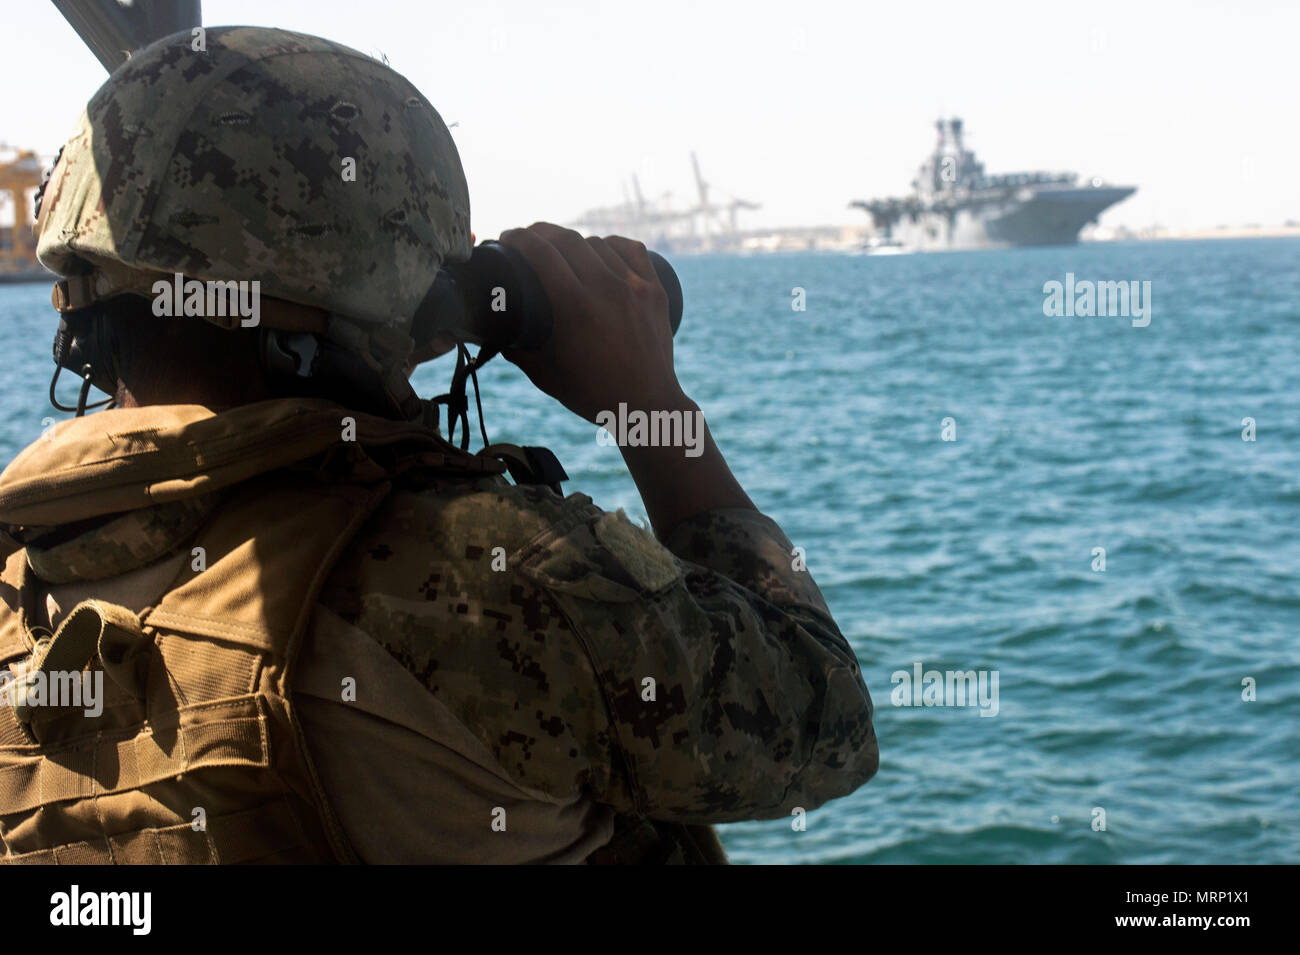 ARABIAN GULF (June 13, 2017) Operations Specialist 3rd Class Francisco Andresdiego, part of Coastal Riverine Squadron (CRS) 3, attached to Task Group (TG) 56.7, stands watch while providing a security escort for the amphibious assault ship USS Bataan (LHD 5) as it departs from Jebel Ali, United Arab Emirates June 13. The ship and its ready group are deployed in the U.S. 5th Fleet area of operations in support of maritime security operations  to reassure allies and partners, and preserve the freedom of navigation and the free flow of commerce in the region. (U.S. Navy photo by Mass Communicatio Stock Photo